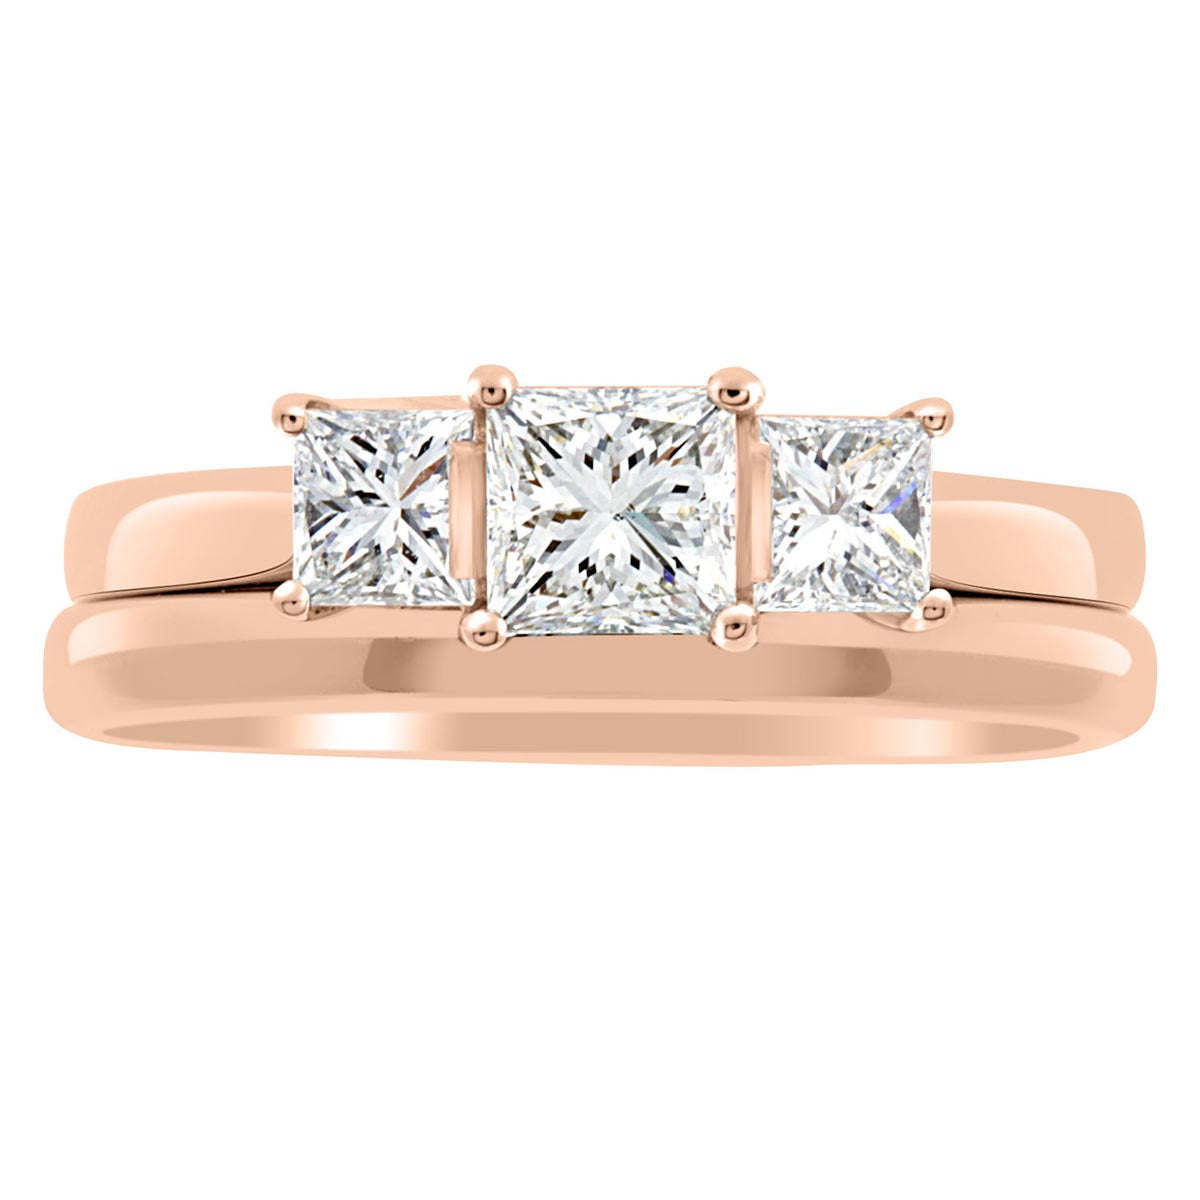 Three Stone Princess Cut Diamond Ring made from rose gold with a matching plain wedding ring